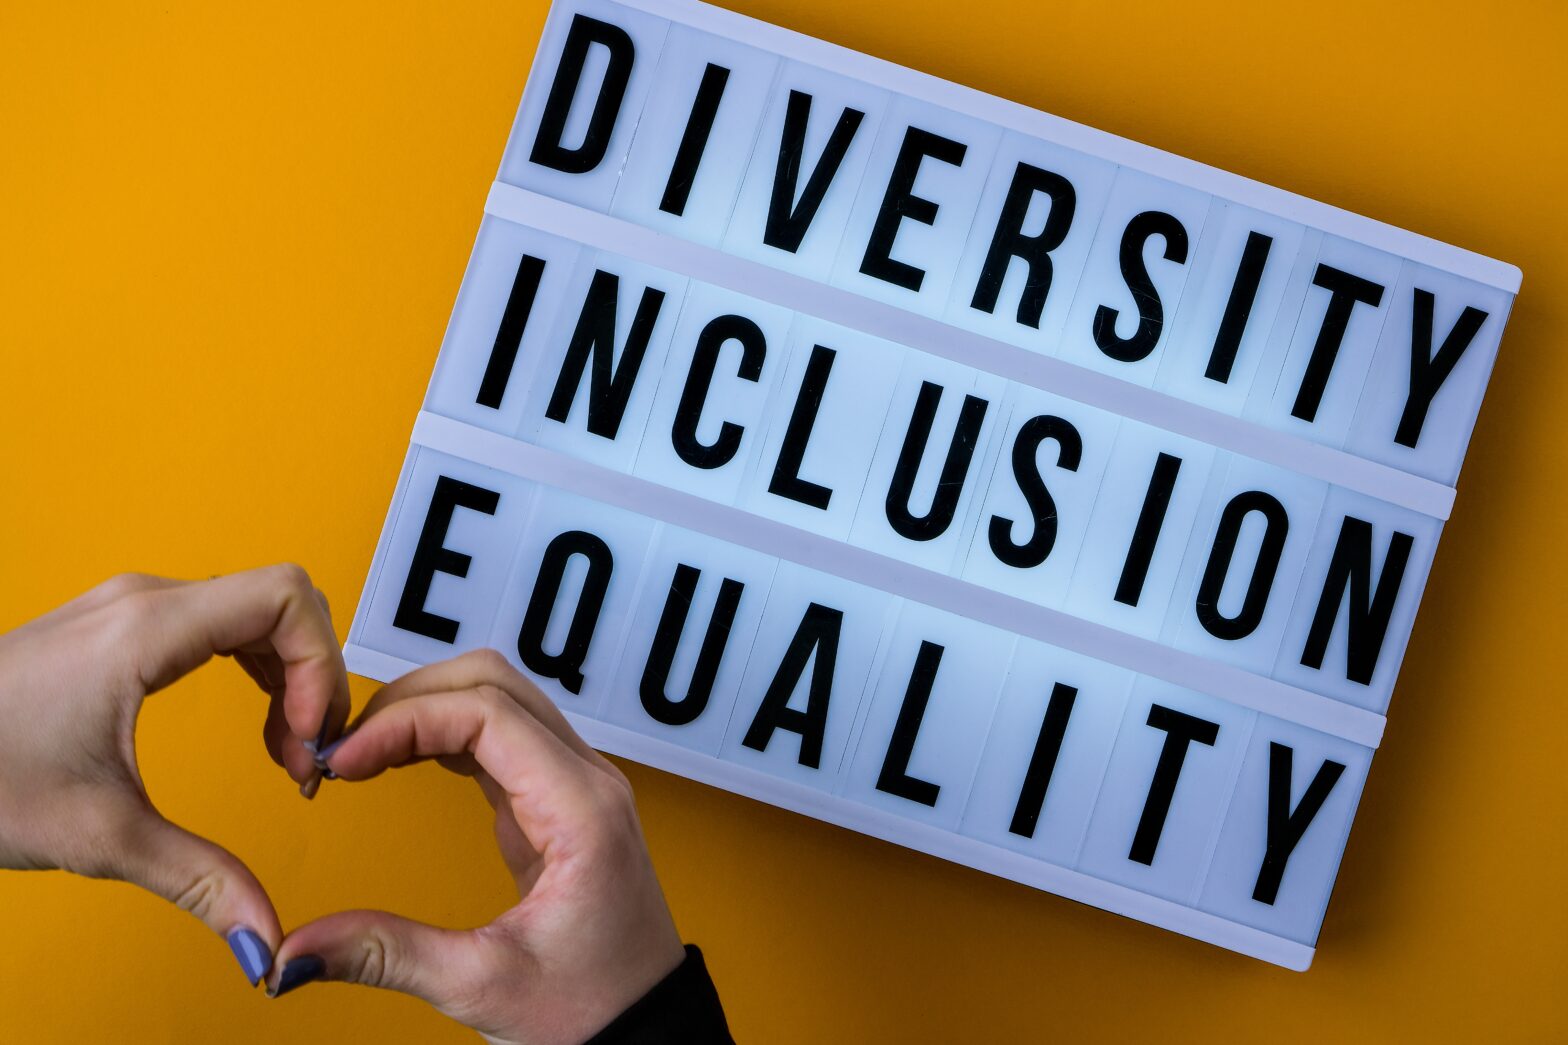 diversity-inclusion-equality-